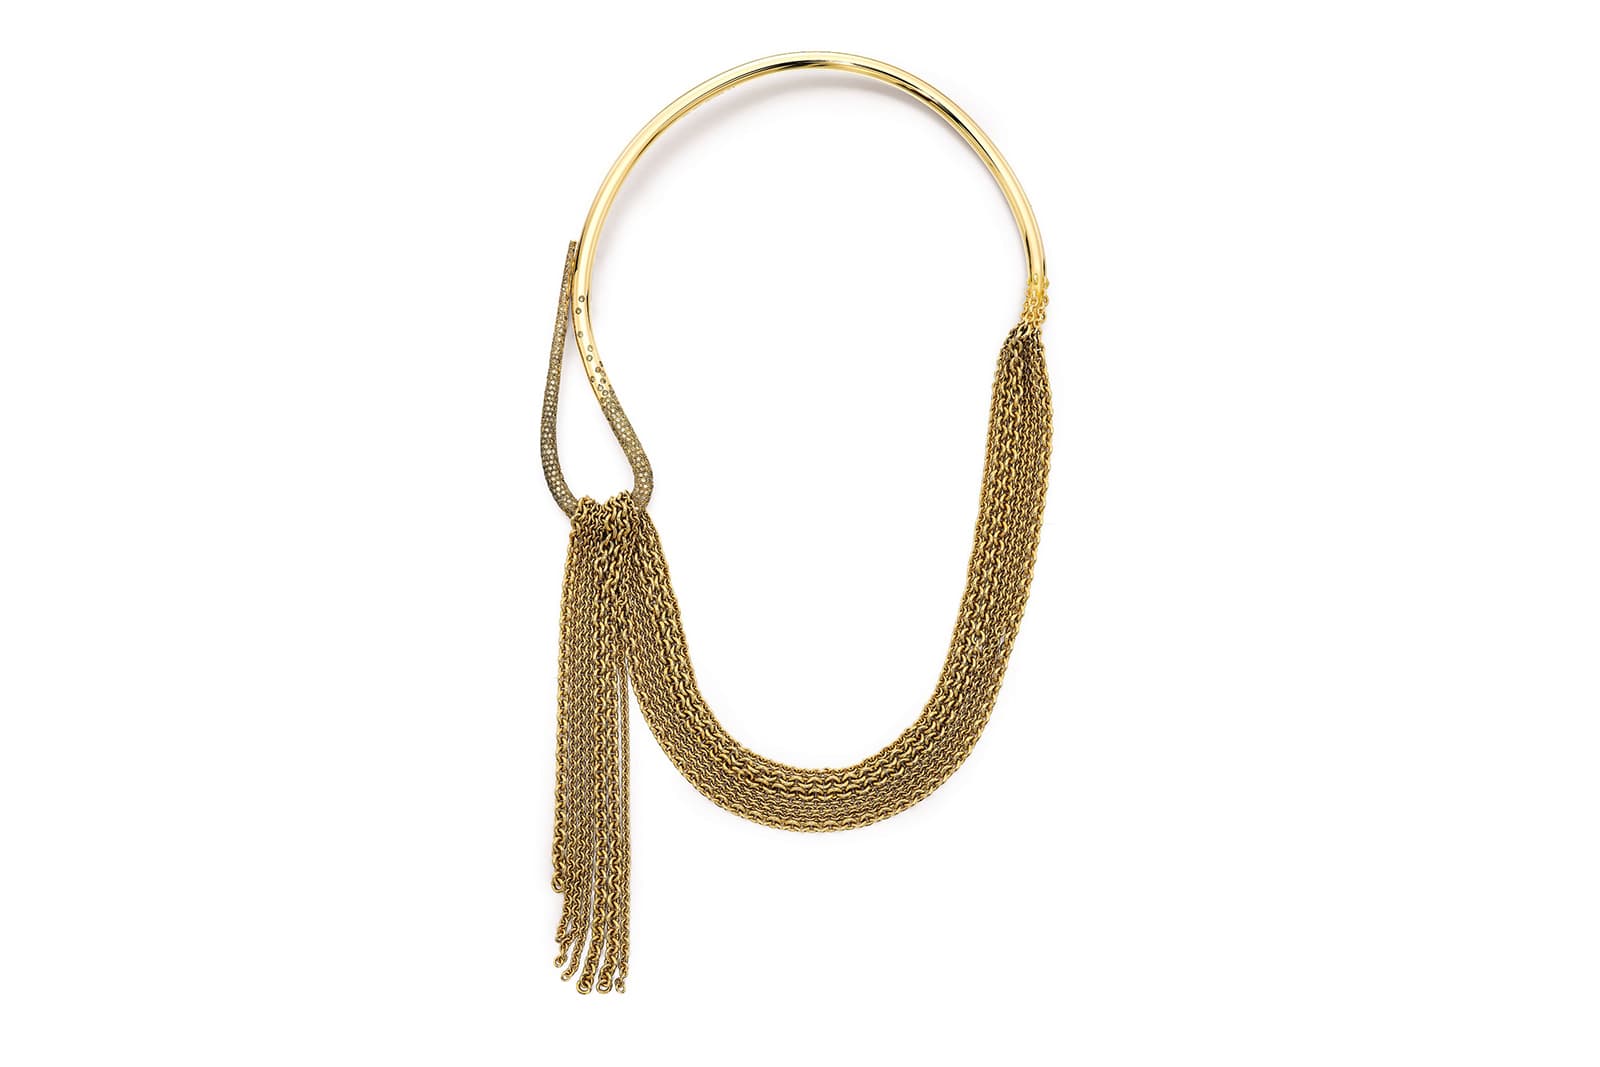 A gold and diamond necklace by Hermès